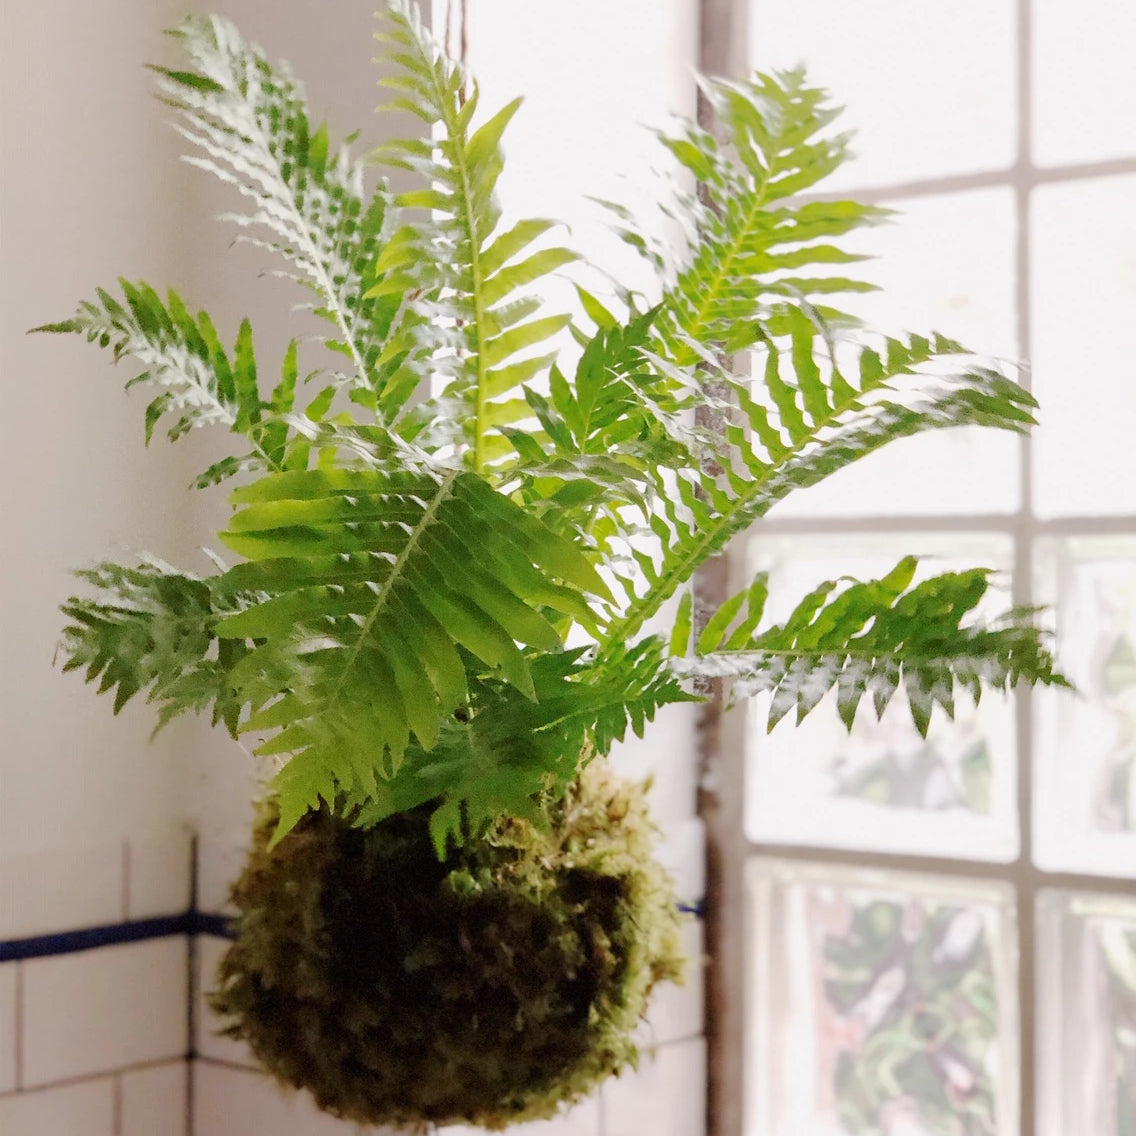 Hanging fern kokedama in front of bright window